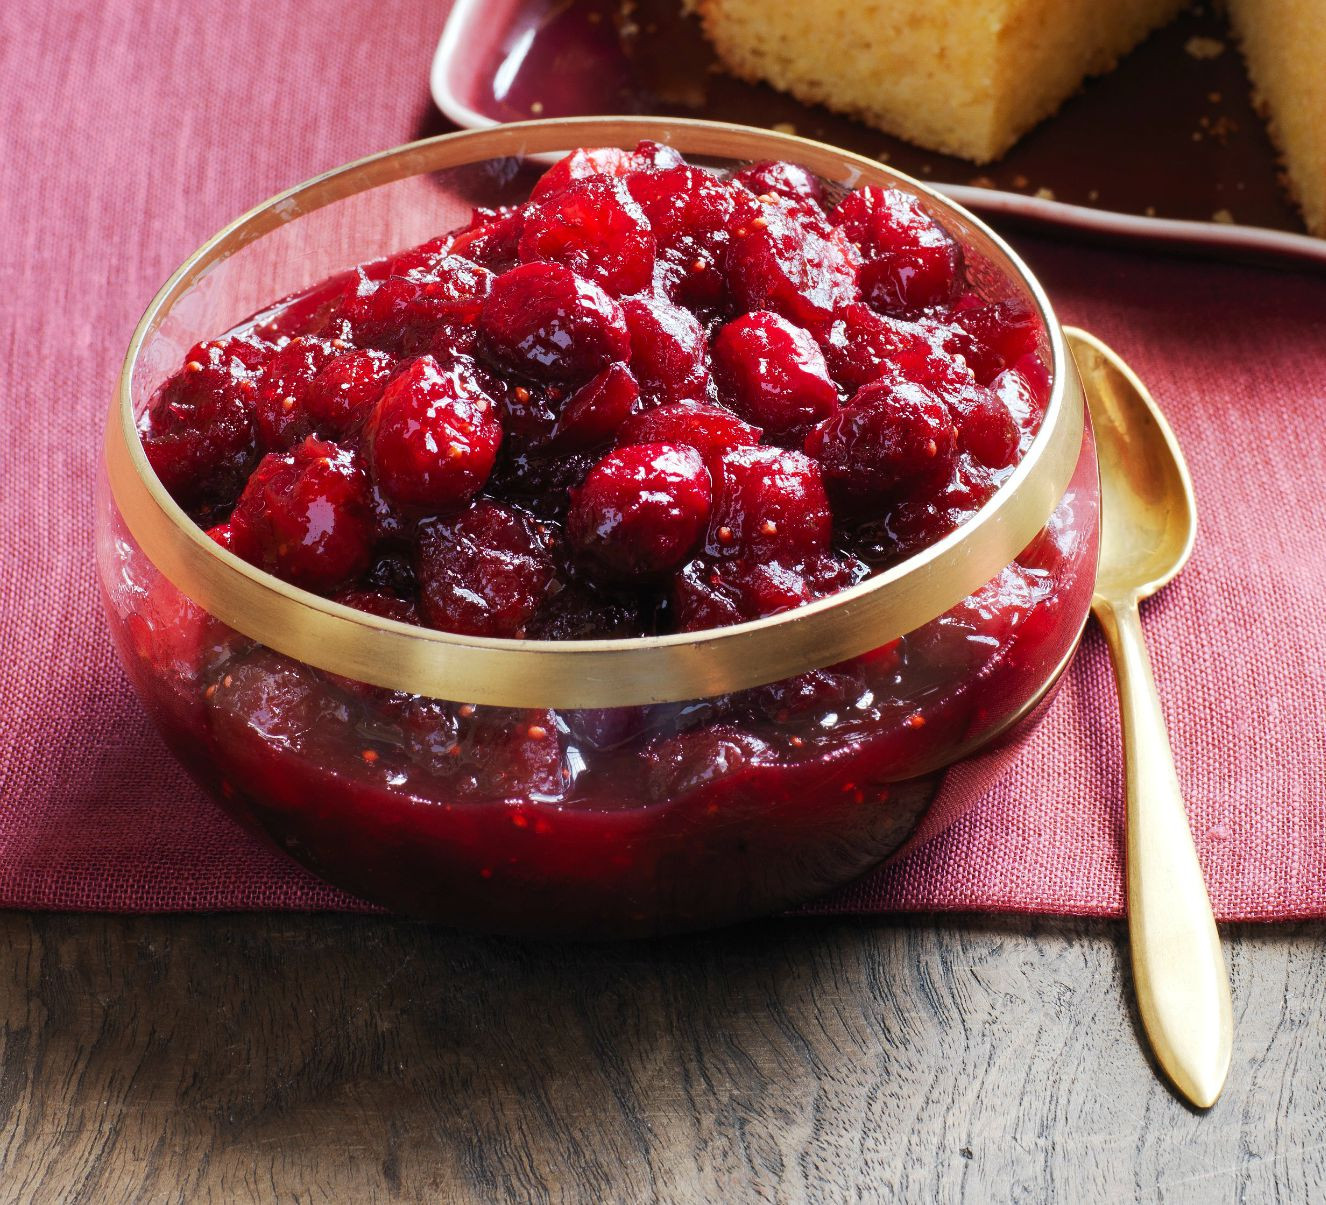 Cranberry Sauce Recipes For Thanksgiving
 25 Best Cranberry Sauce Recipes How To Make Homemade